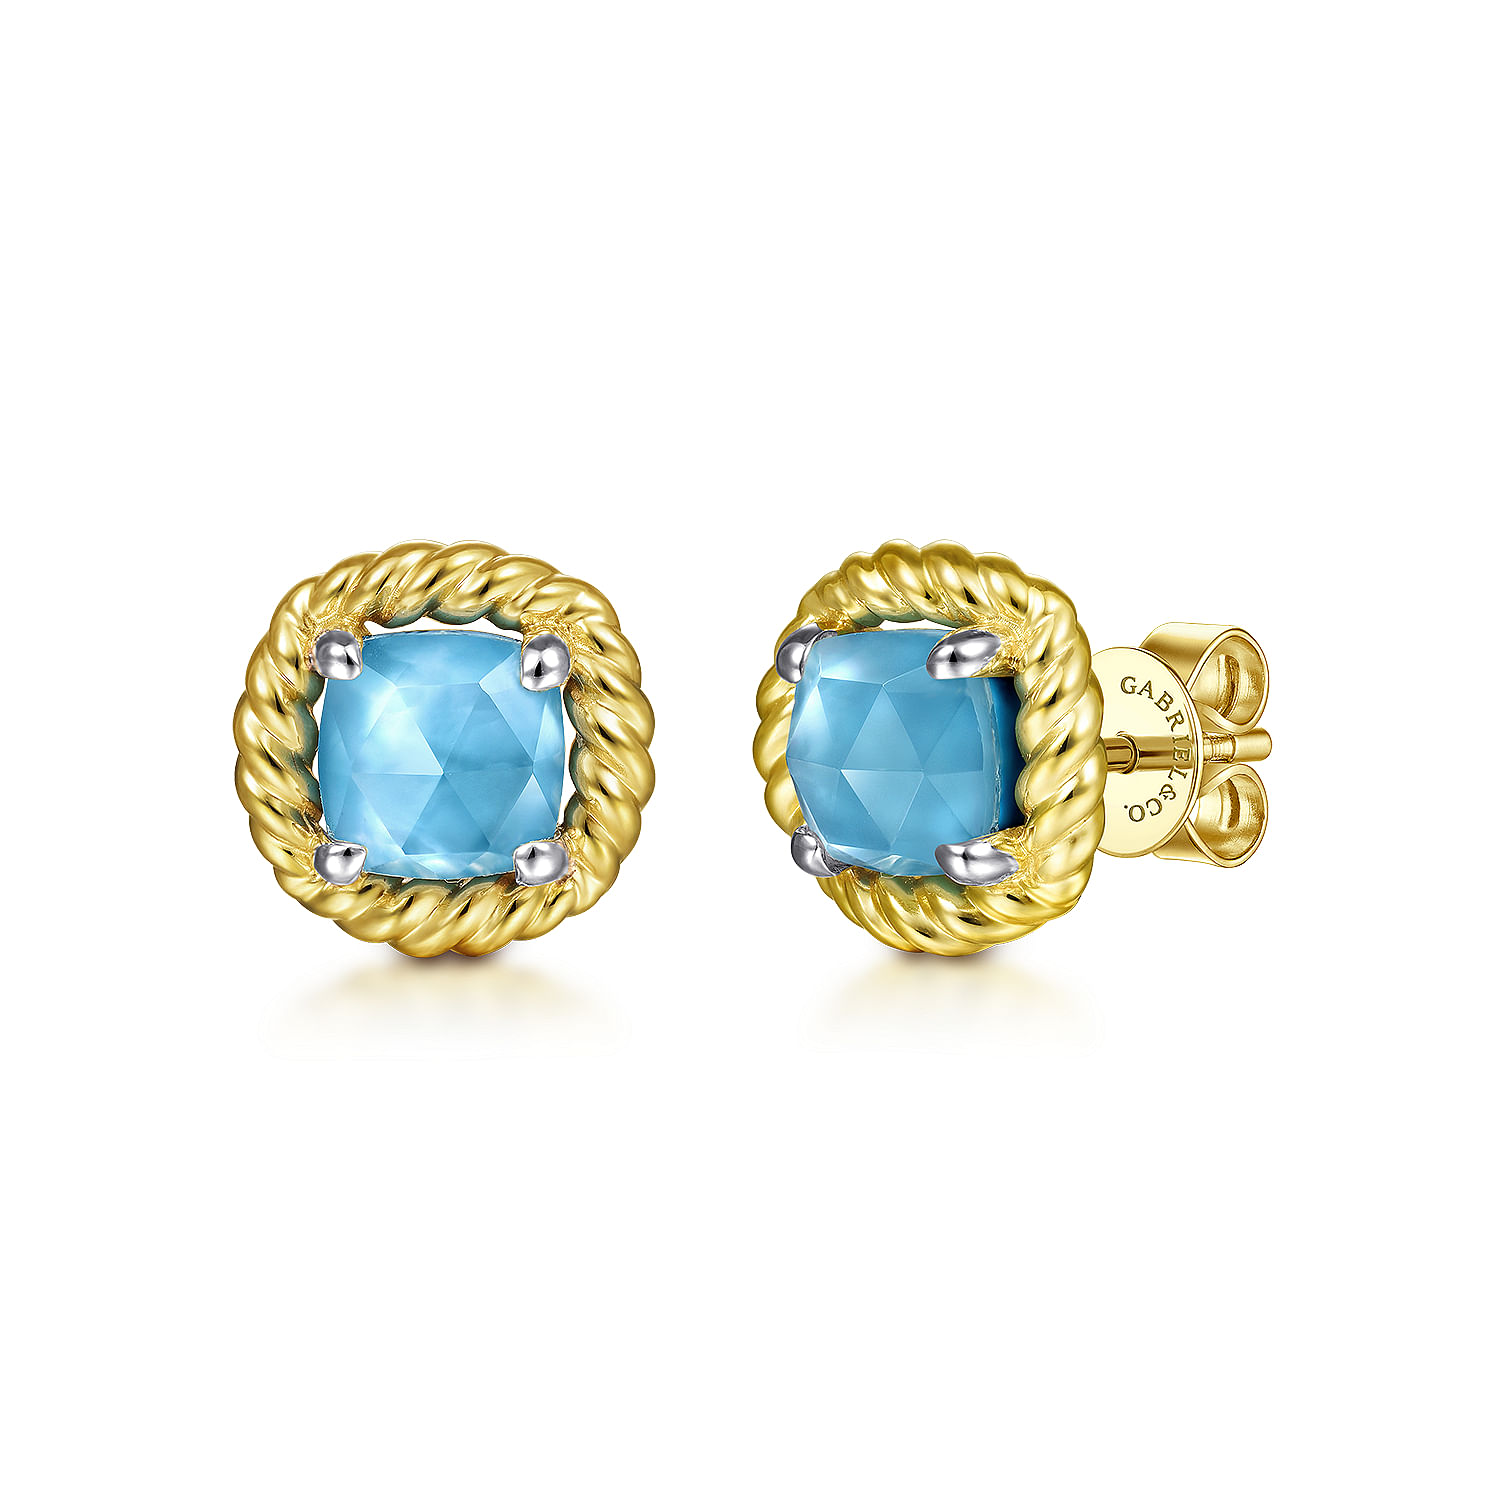 14K Yellow Gold Rock Crystal/White MOP/Turquoise Stud Earrings